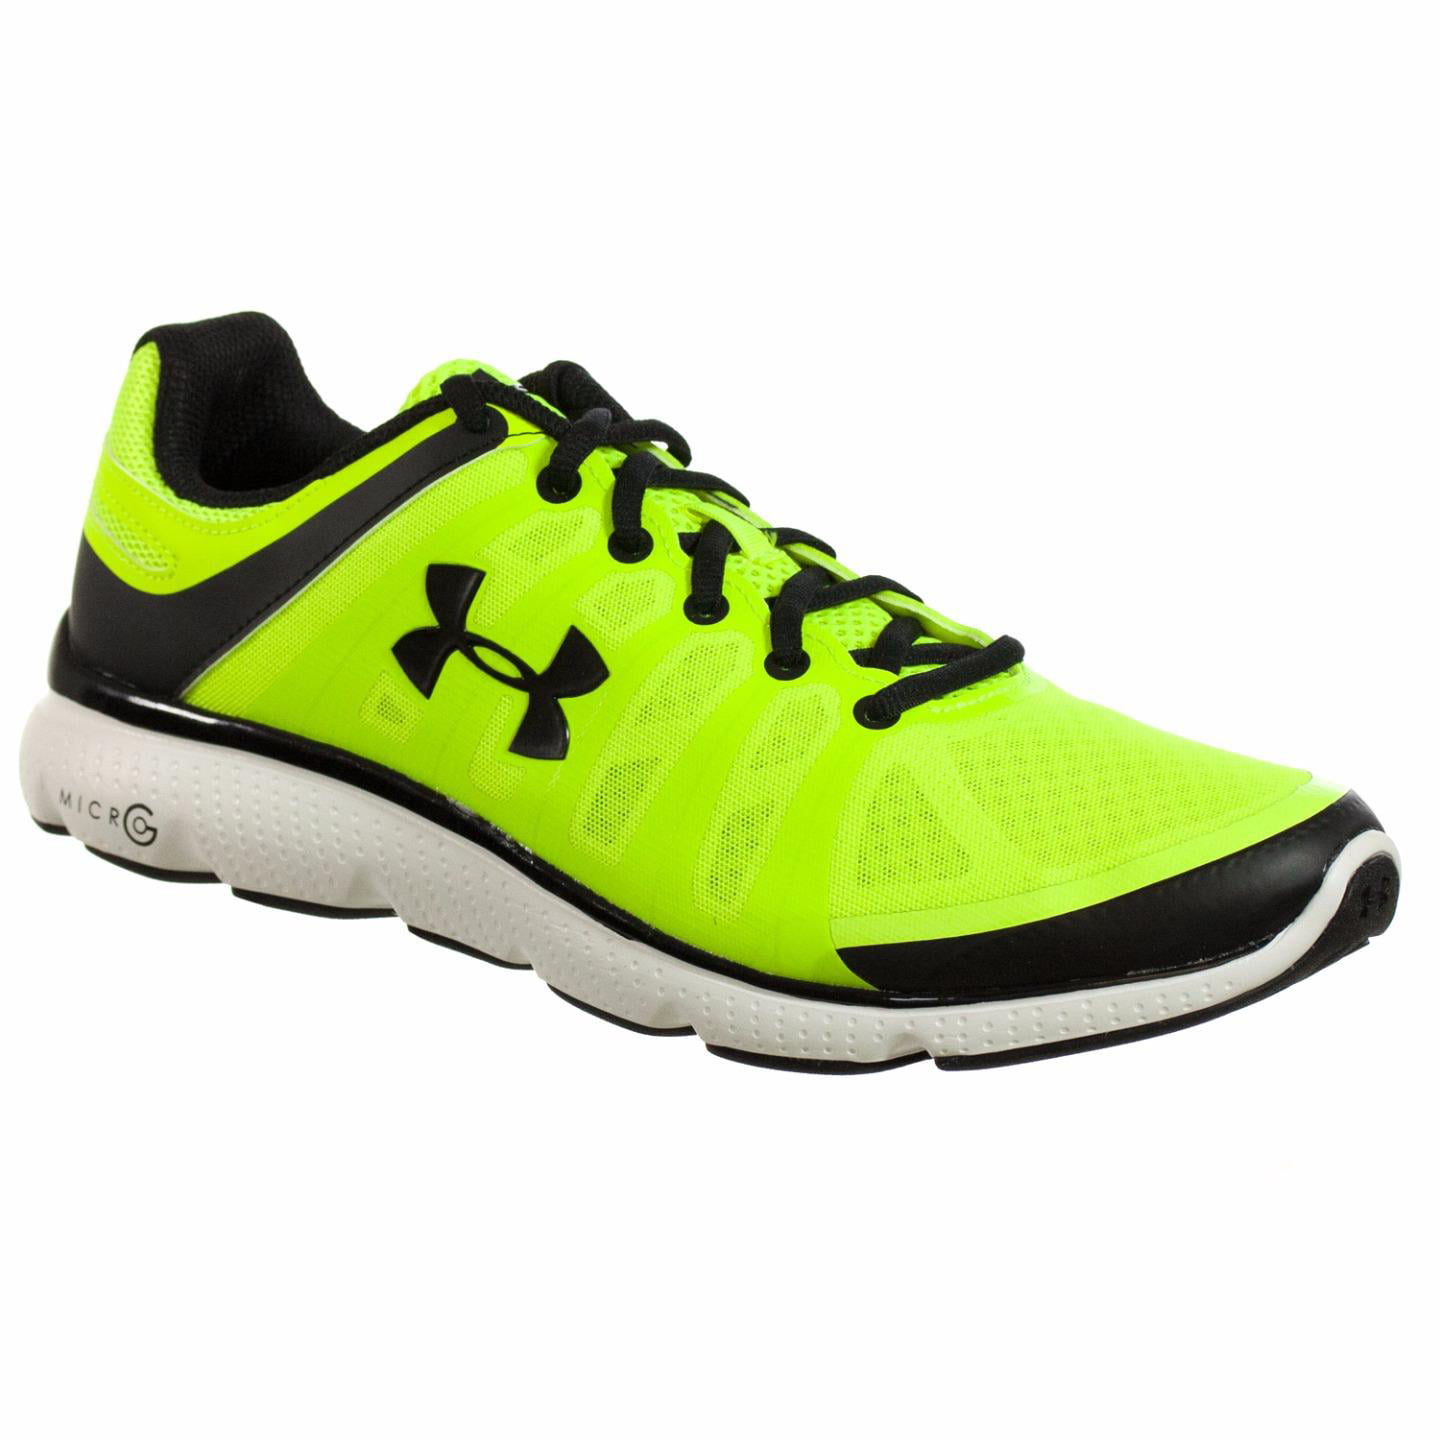 Under Armour - Men's Under Armour Micro G® Pulse II Running Shoes ...